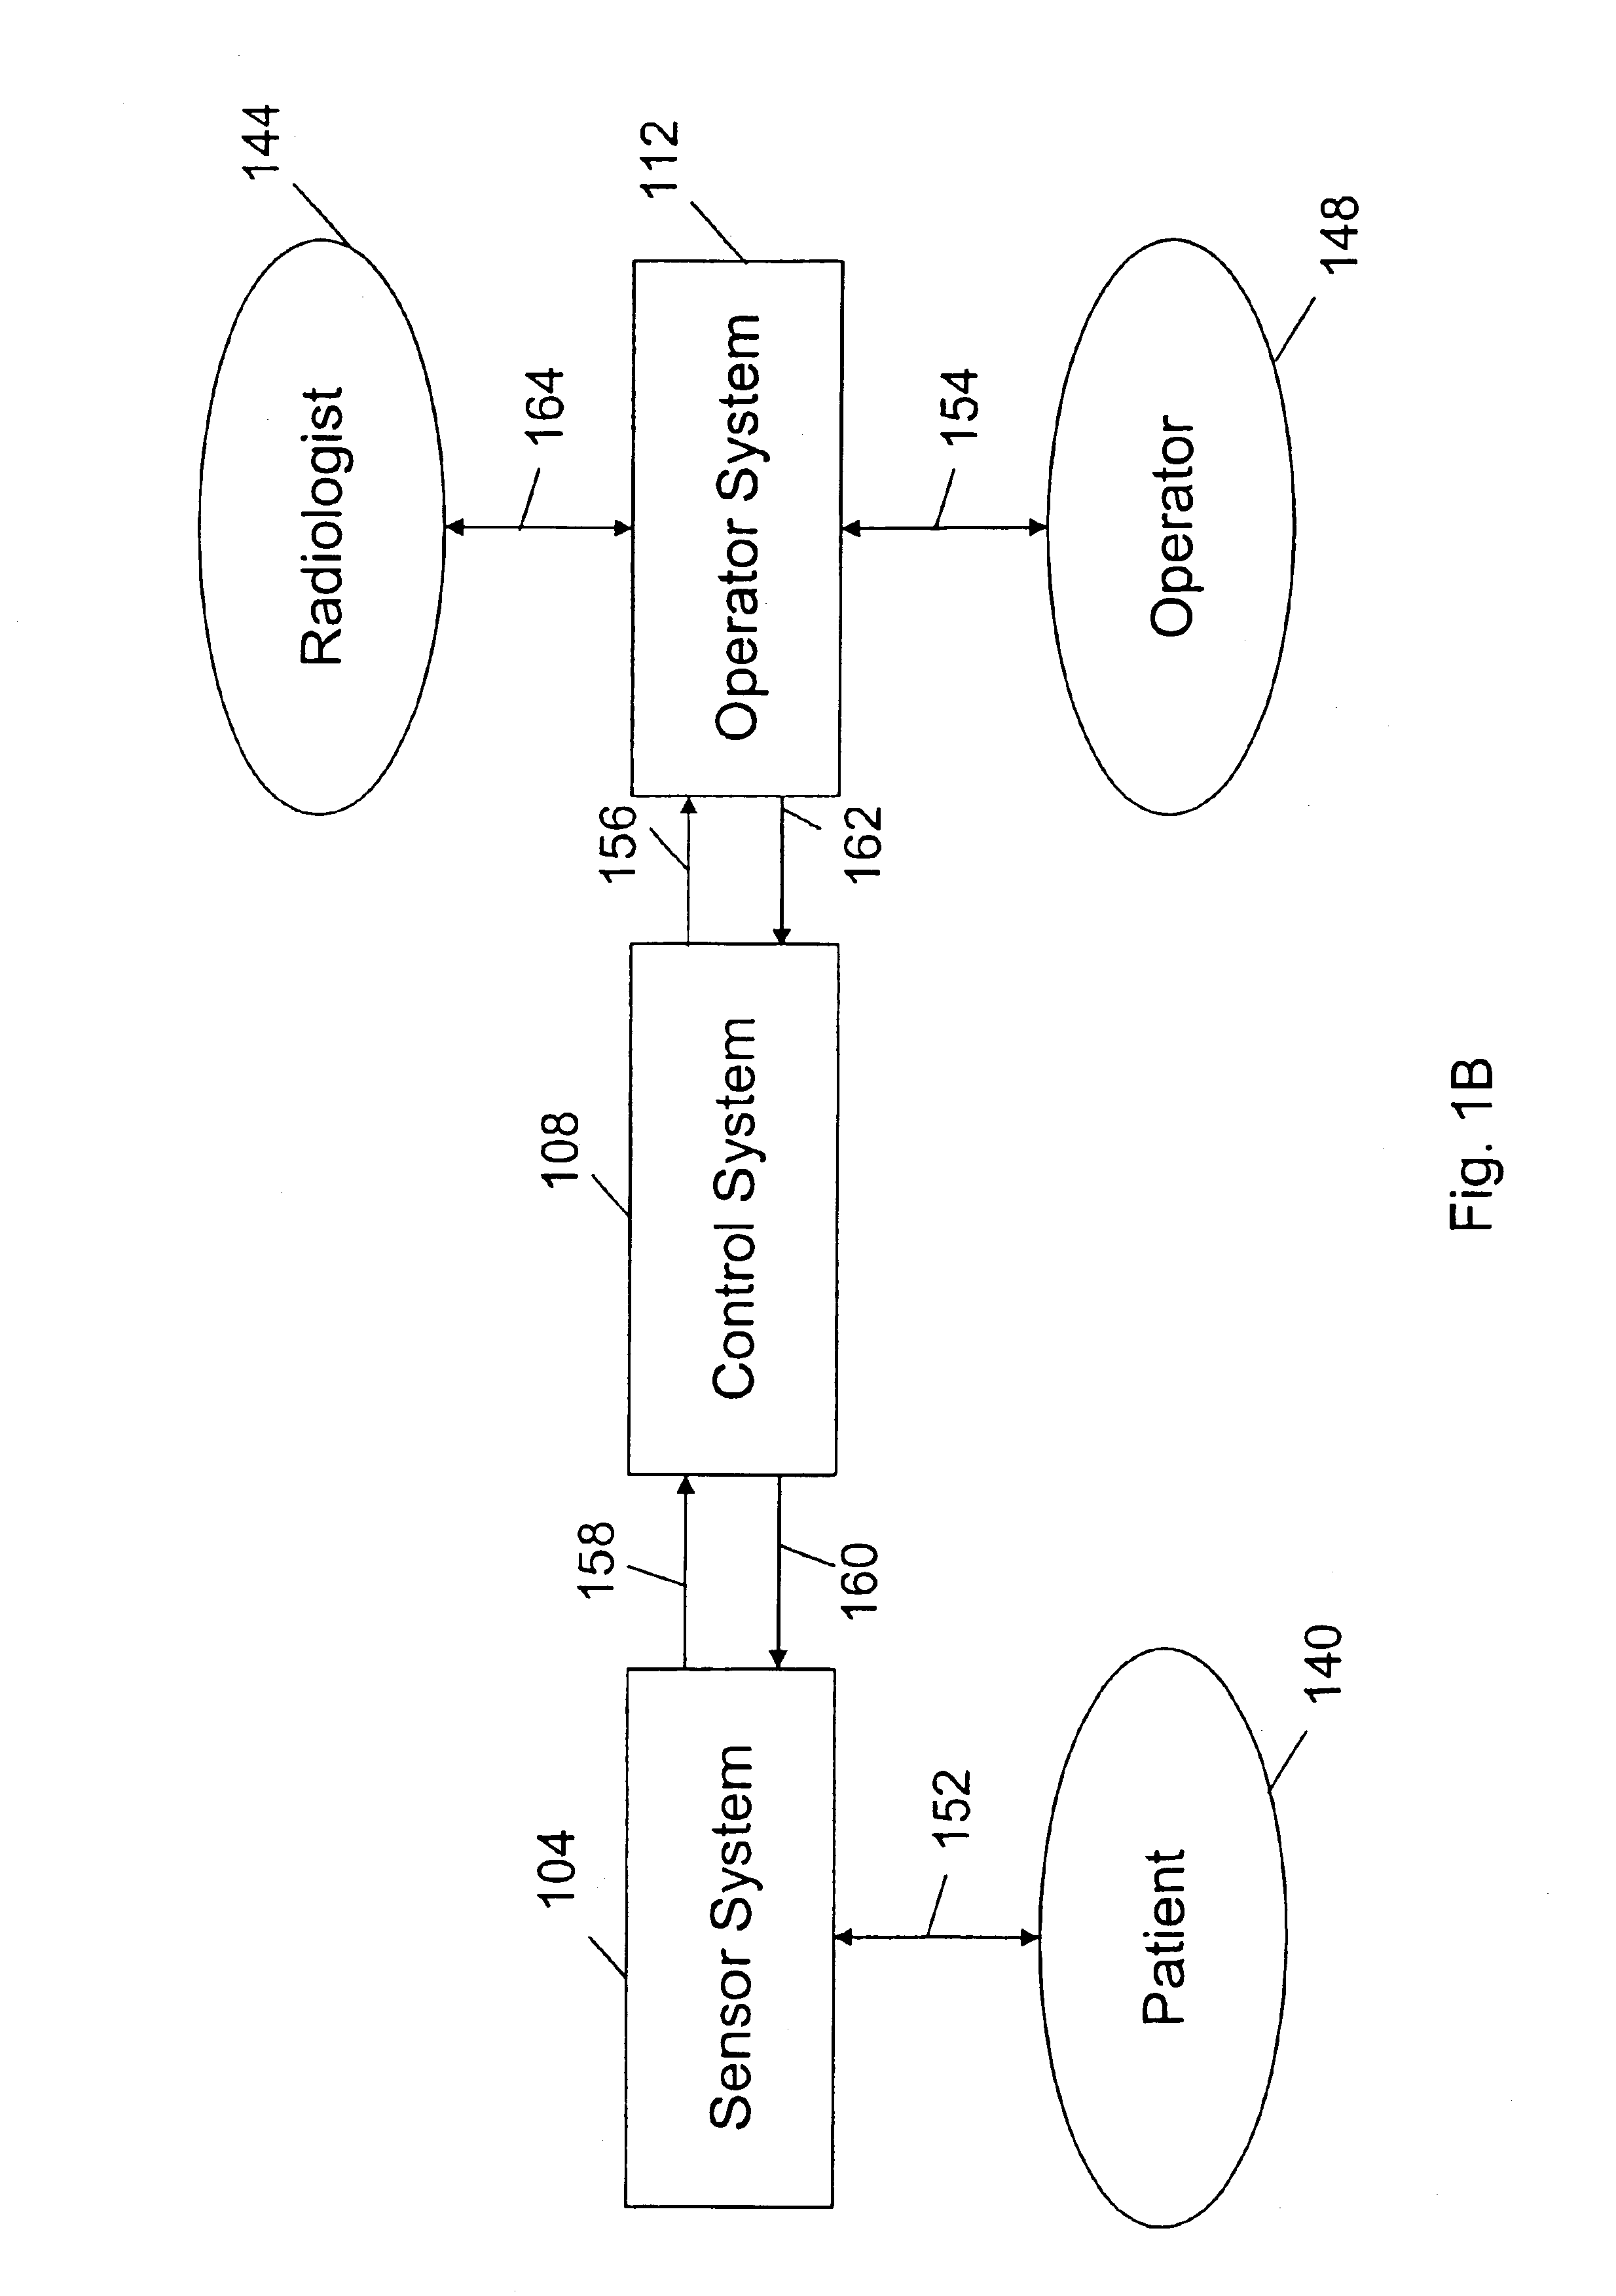 Electret acoustic transducer array for computerized ultrasound risk evaluation system